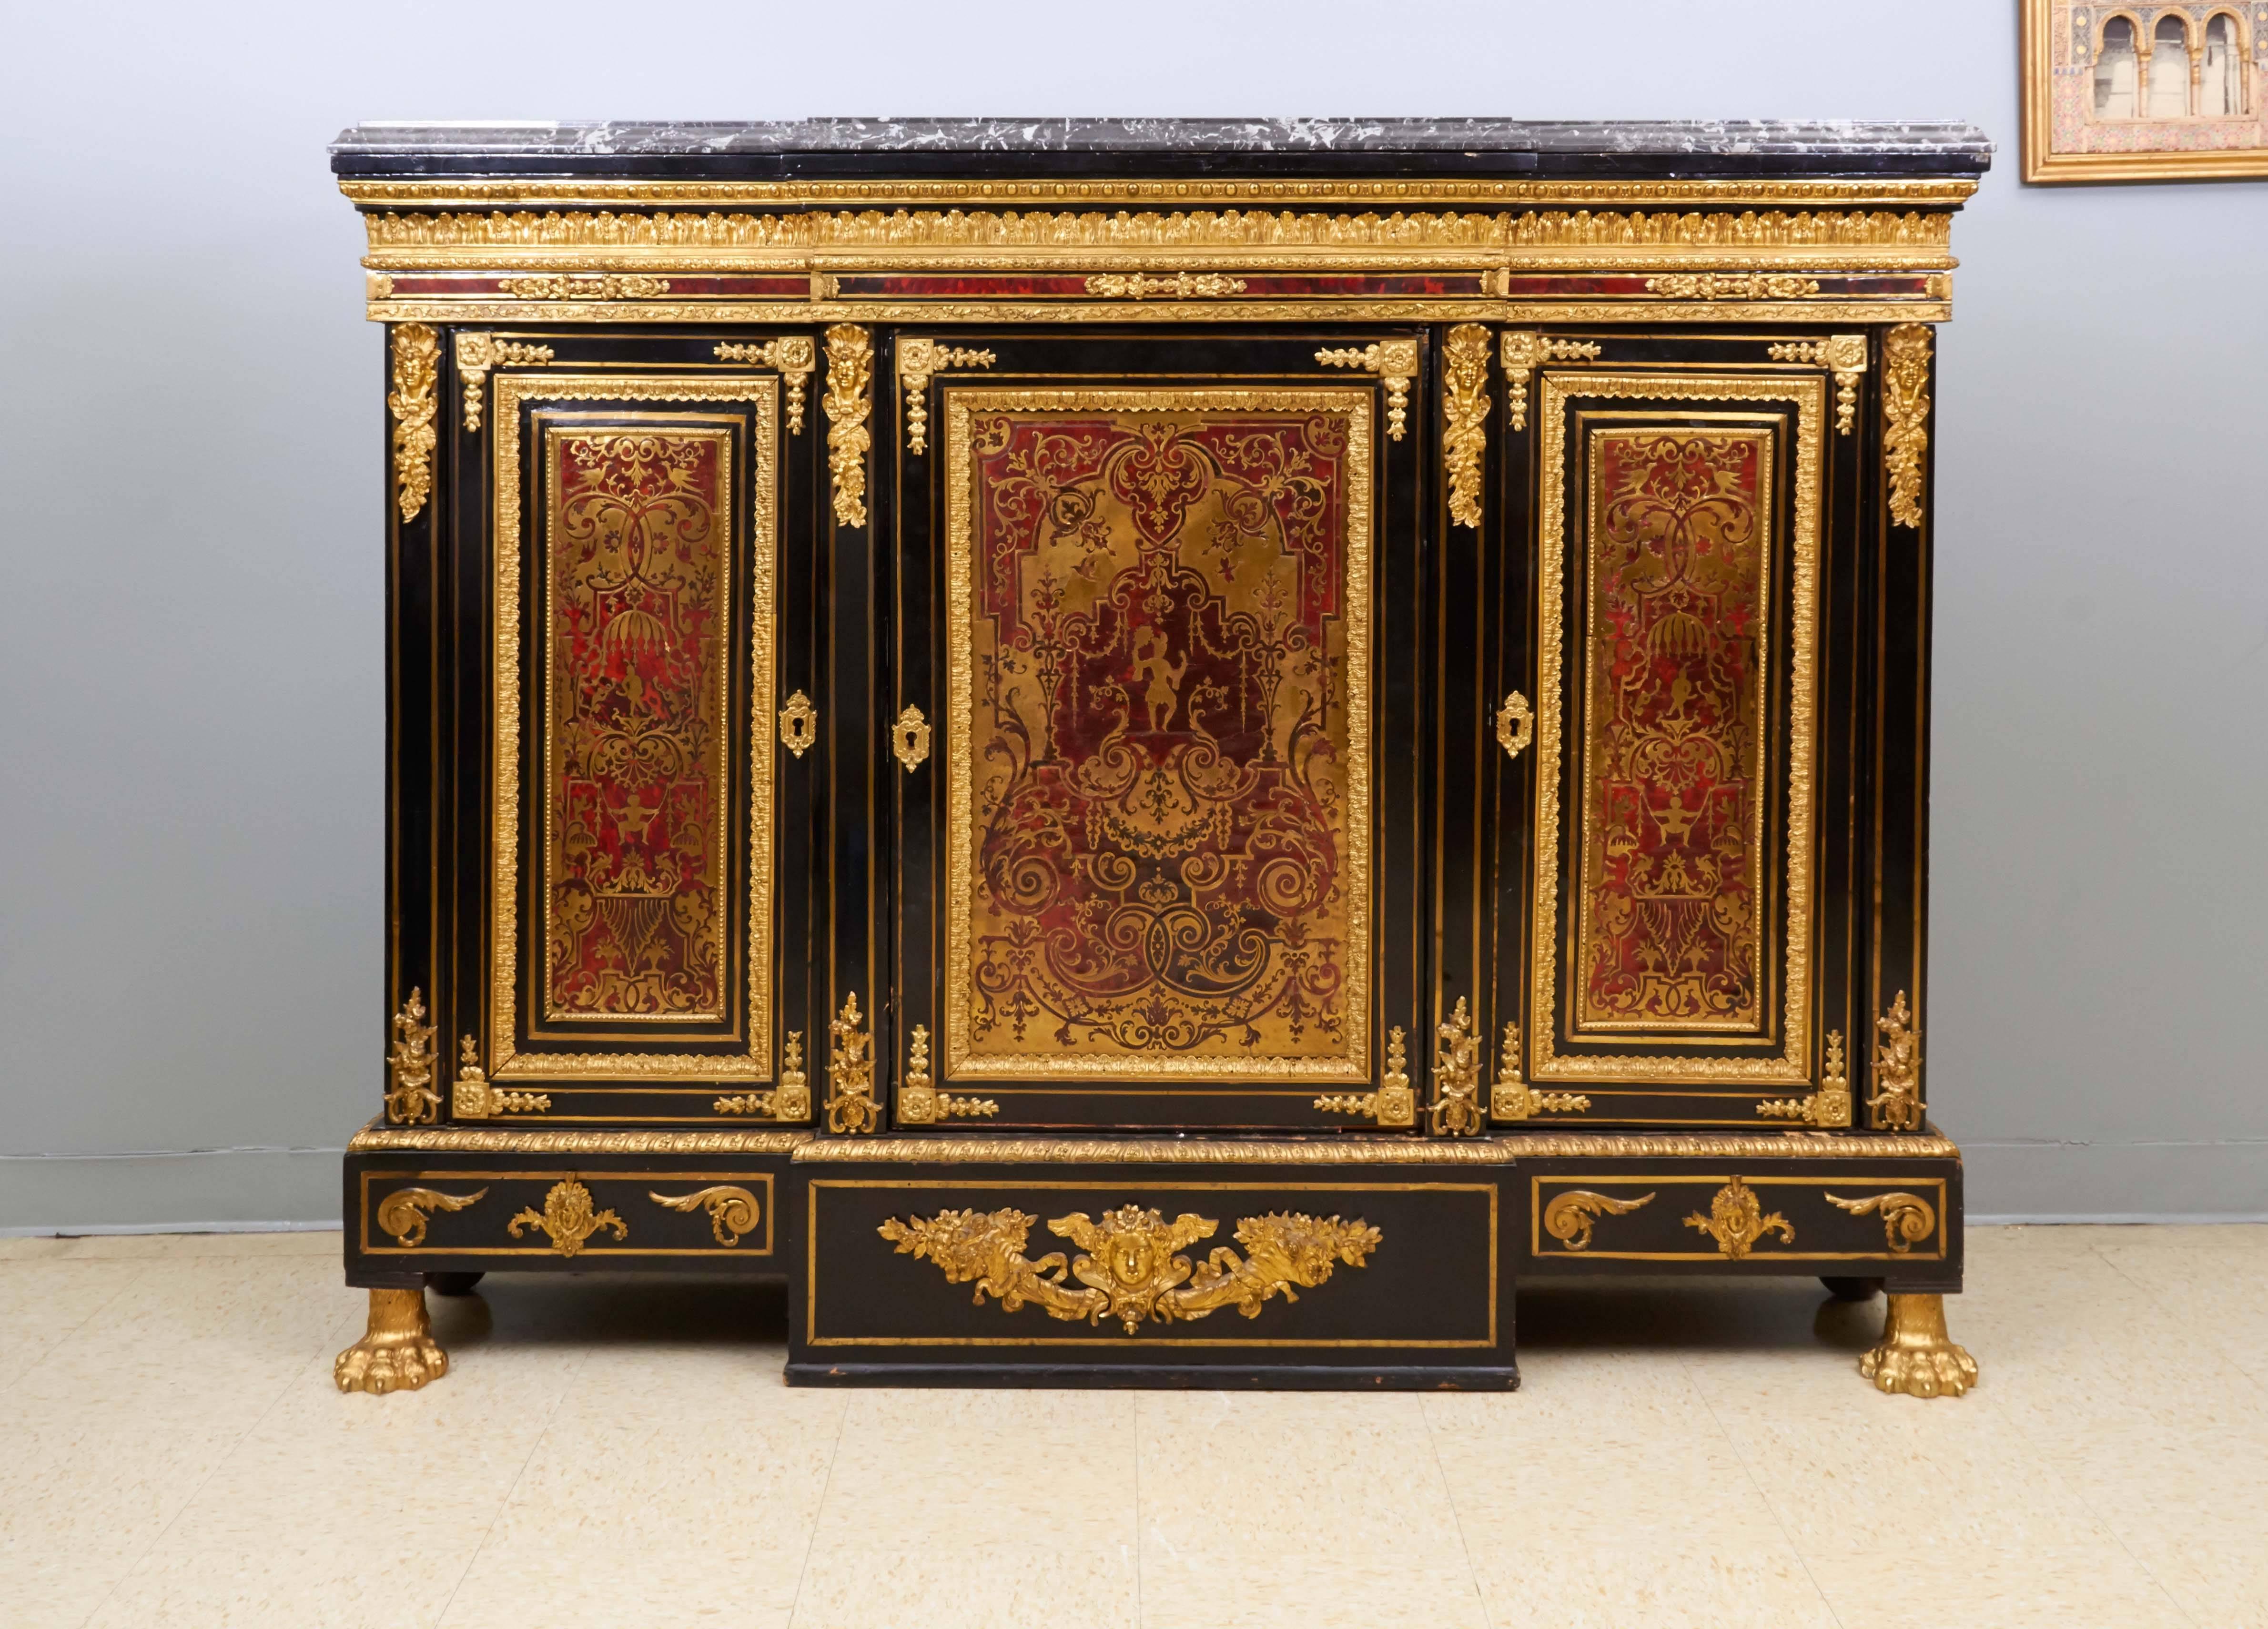 Napoleon III Ormolu-Mounted Boulle Marquetry Marble-Top Commode Cabinet

The panels in the manner of Nicolas Sageot and possibly early 18th century.

Of breakfront outline, the petit antique marble top with moulded edge above three doors, each inset